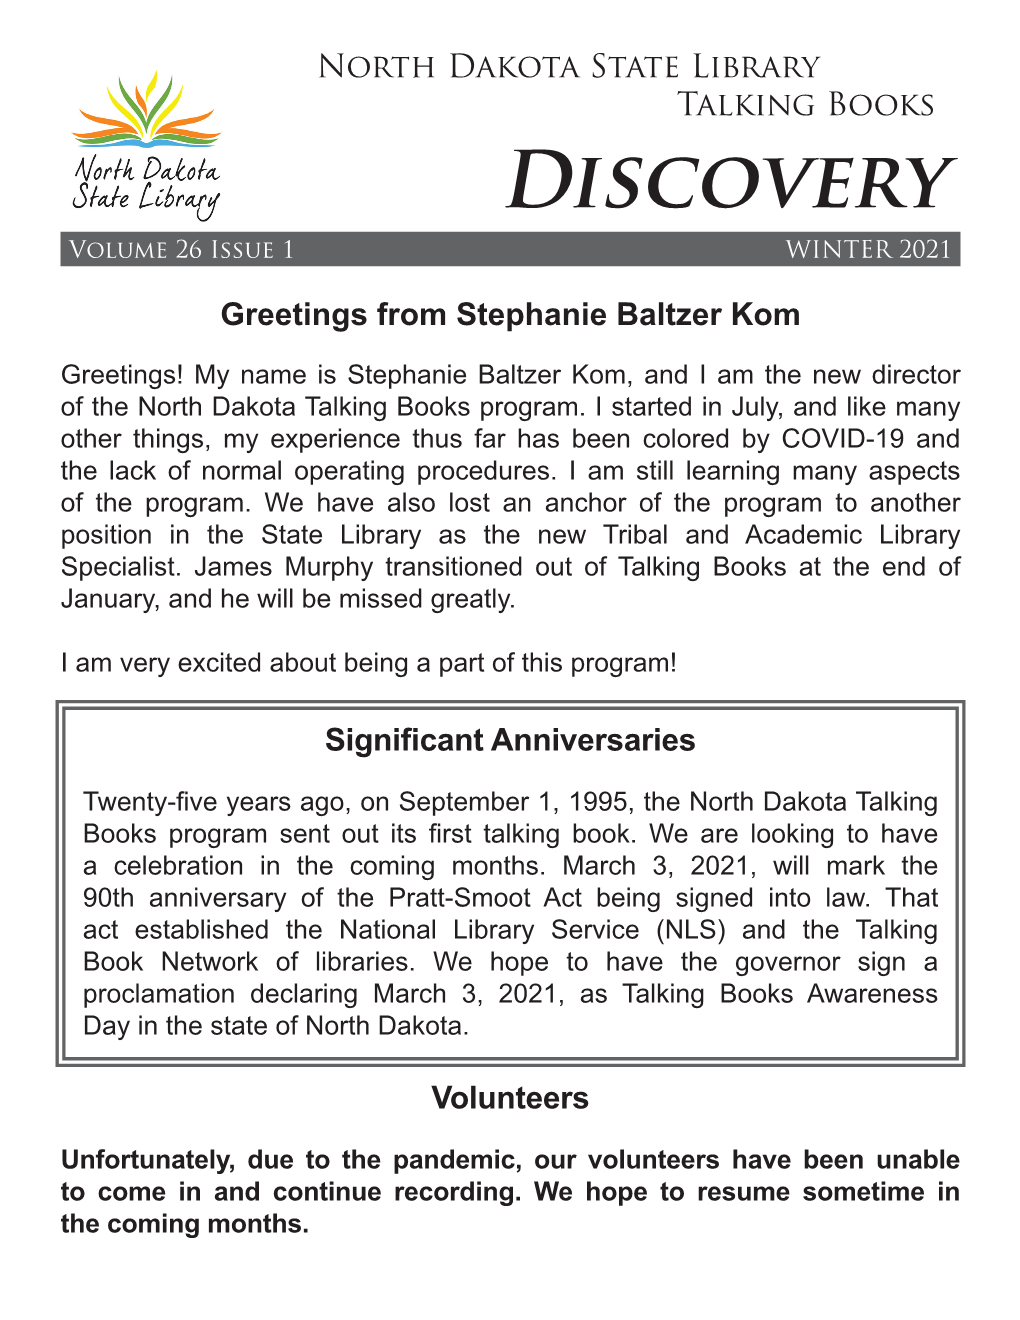 Discovery Volume 26 Issue 1 WINTER 2021